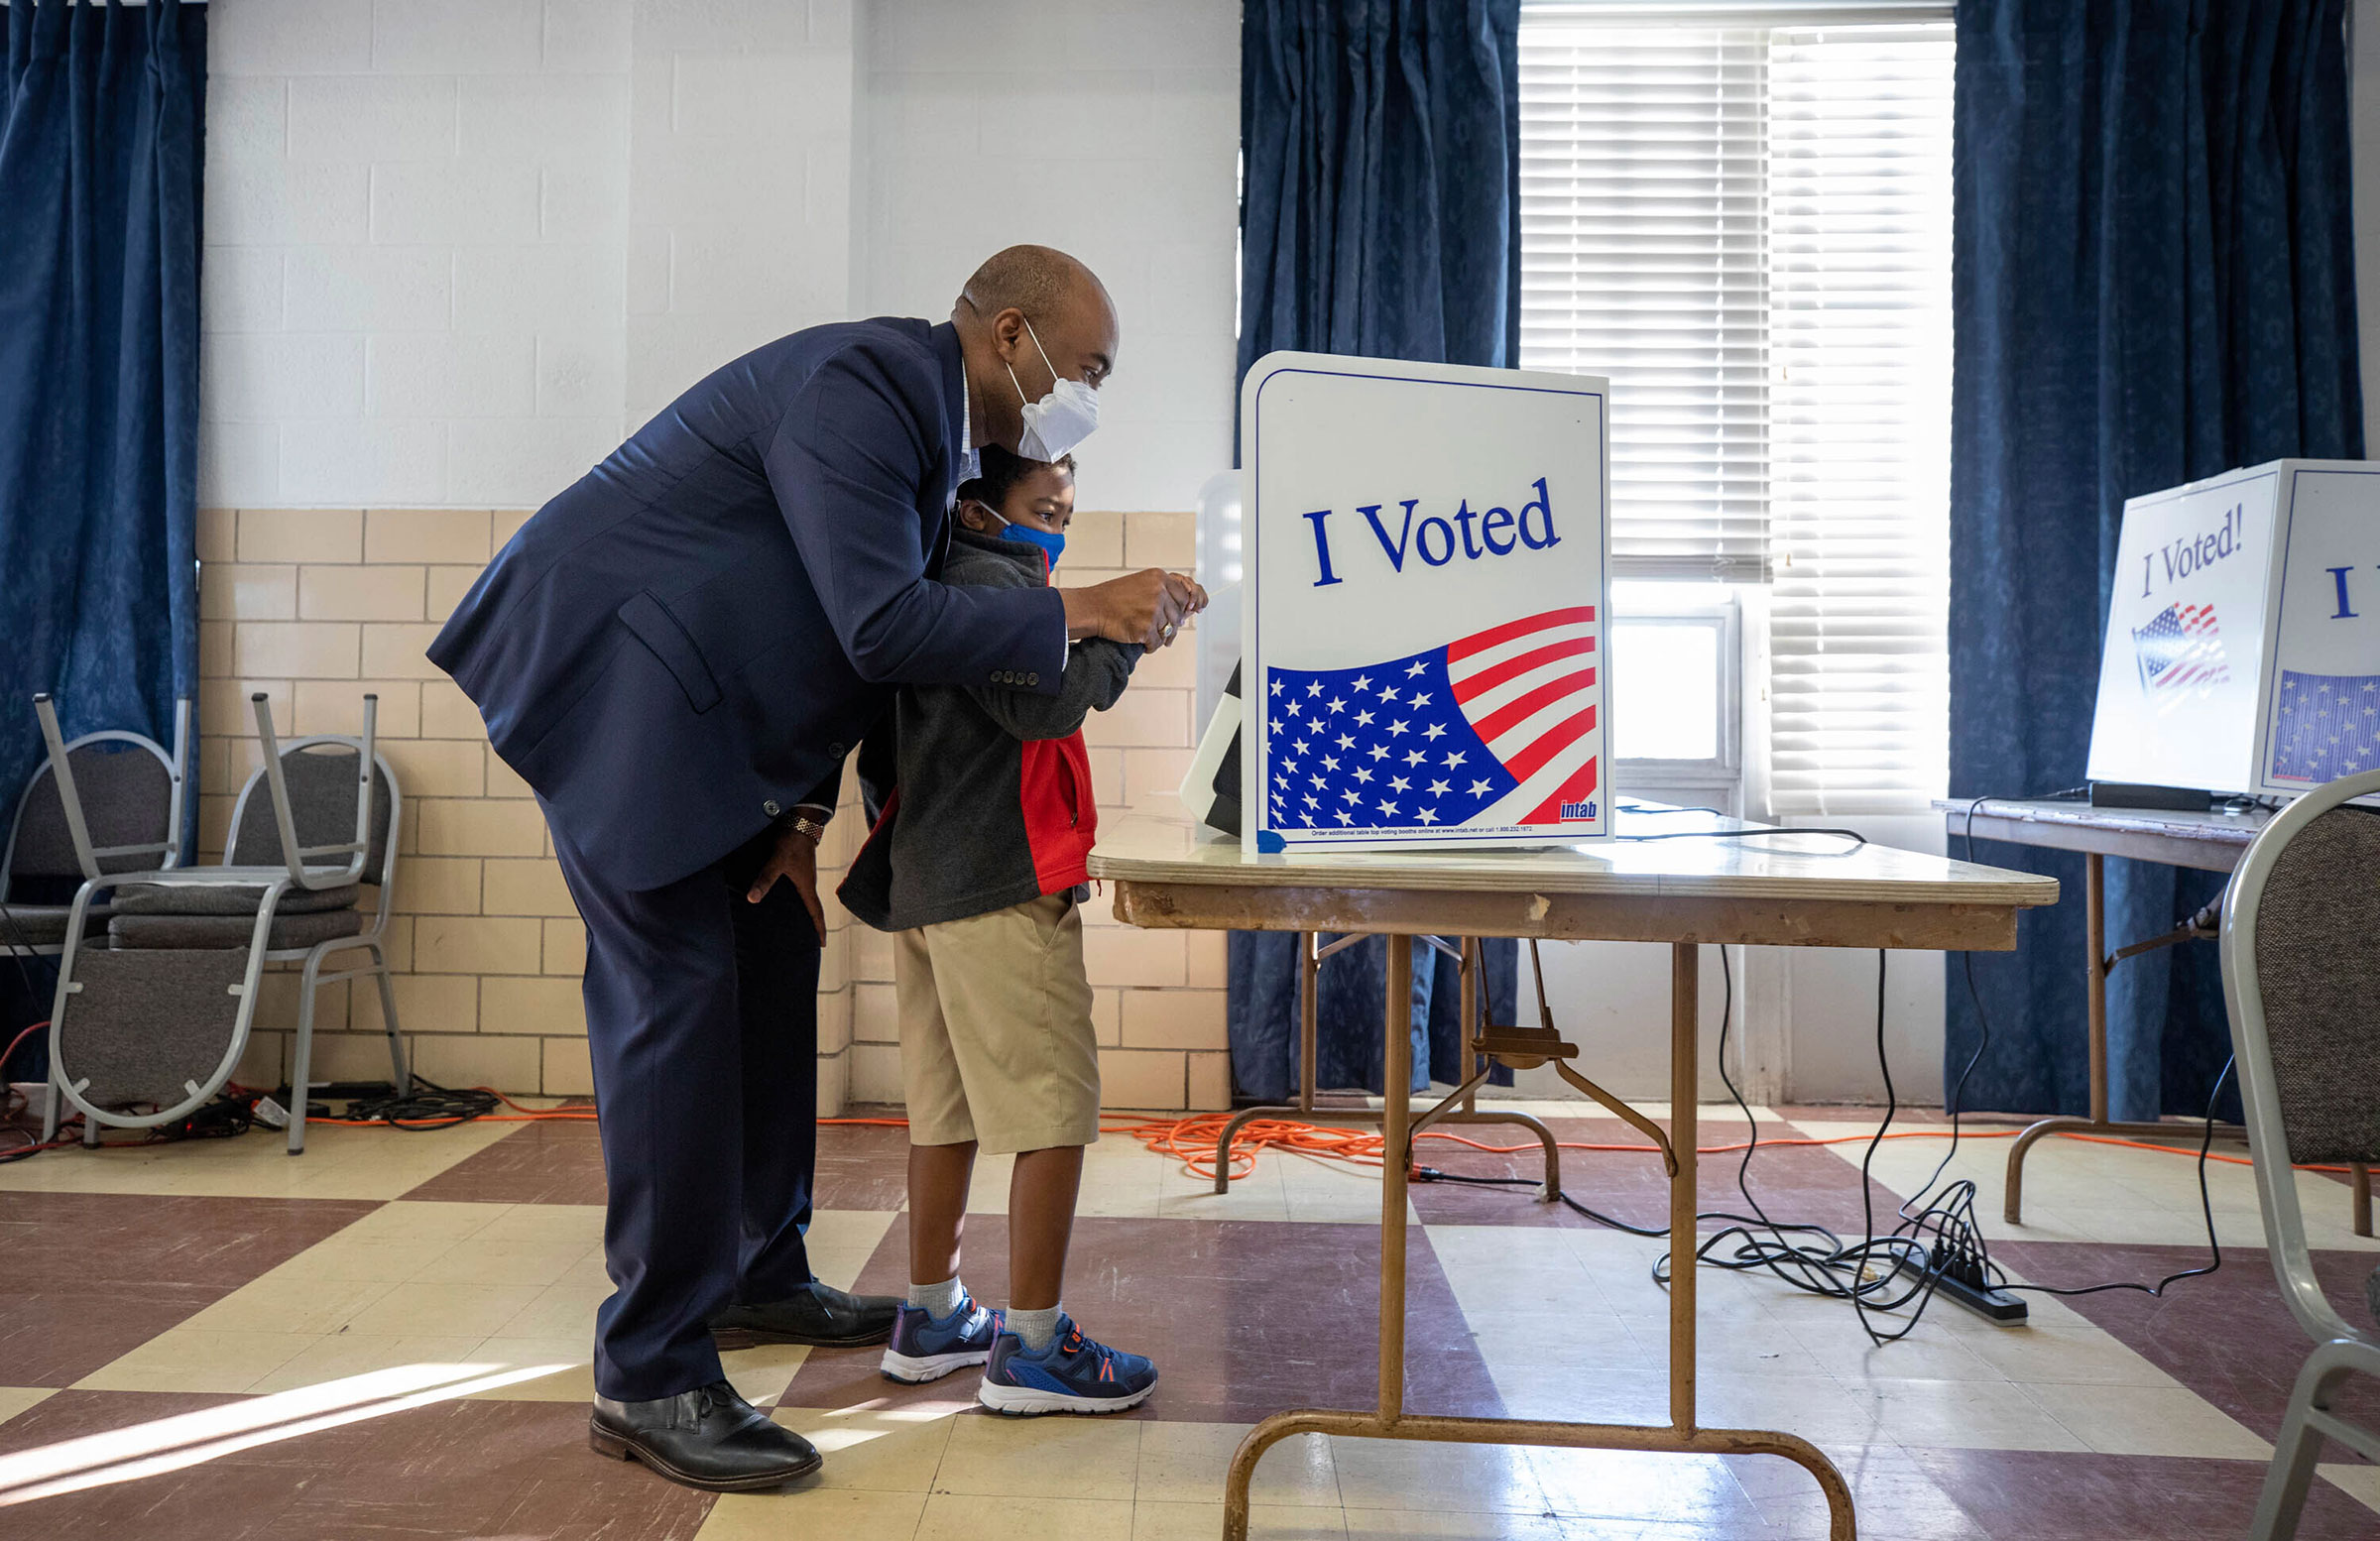 Senate candidate Jaime Harrison votes with his son, William, 6, at the Masonic Temple in Columbia, S.C. on Oct. 19, 2020.